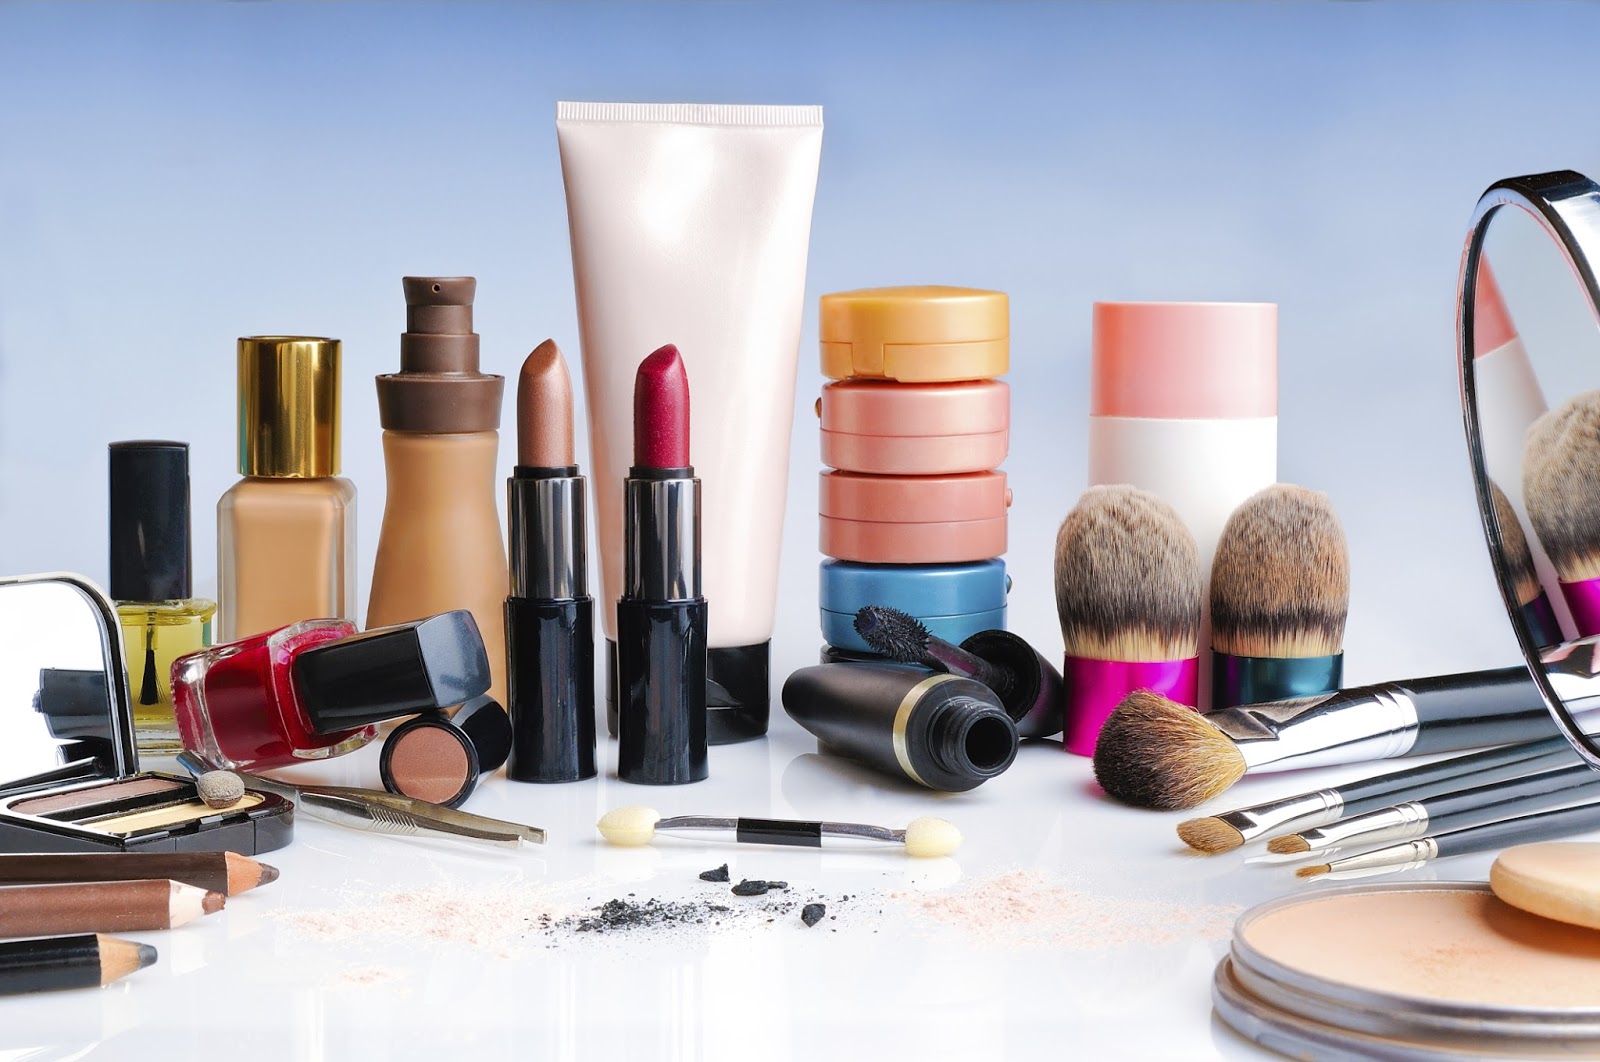 Why Should You Buy Cruelty Free Cosmetics For Yourself Or Your Friends?